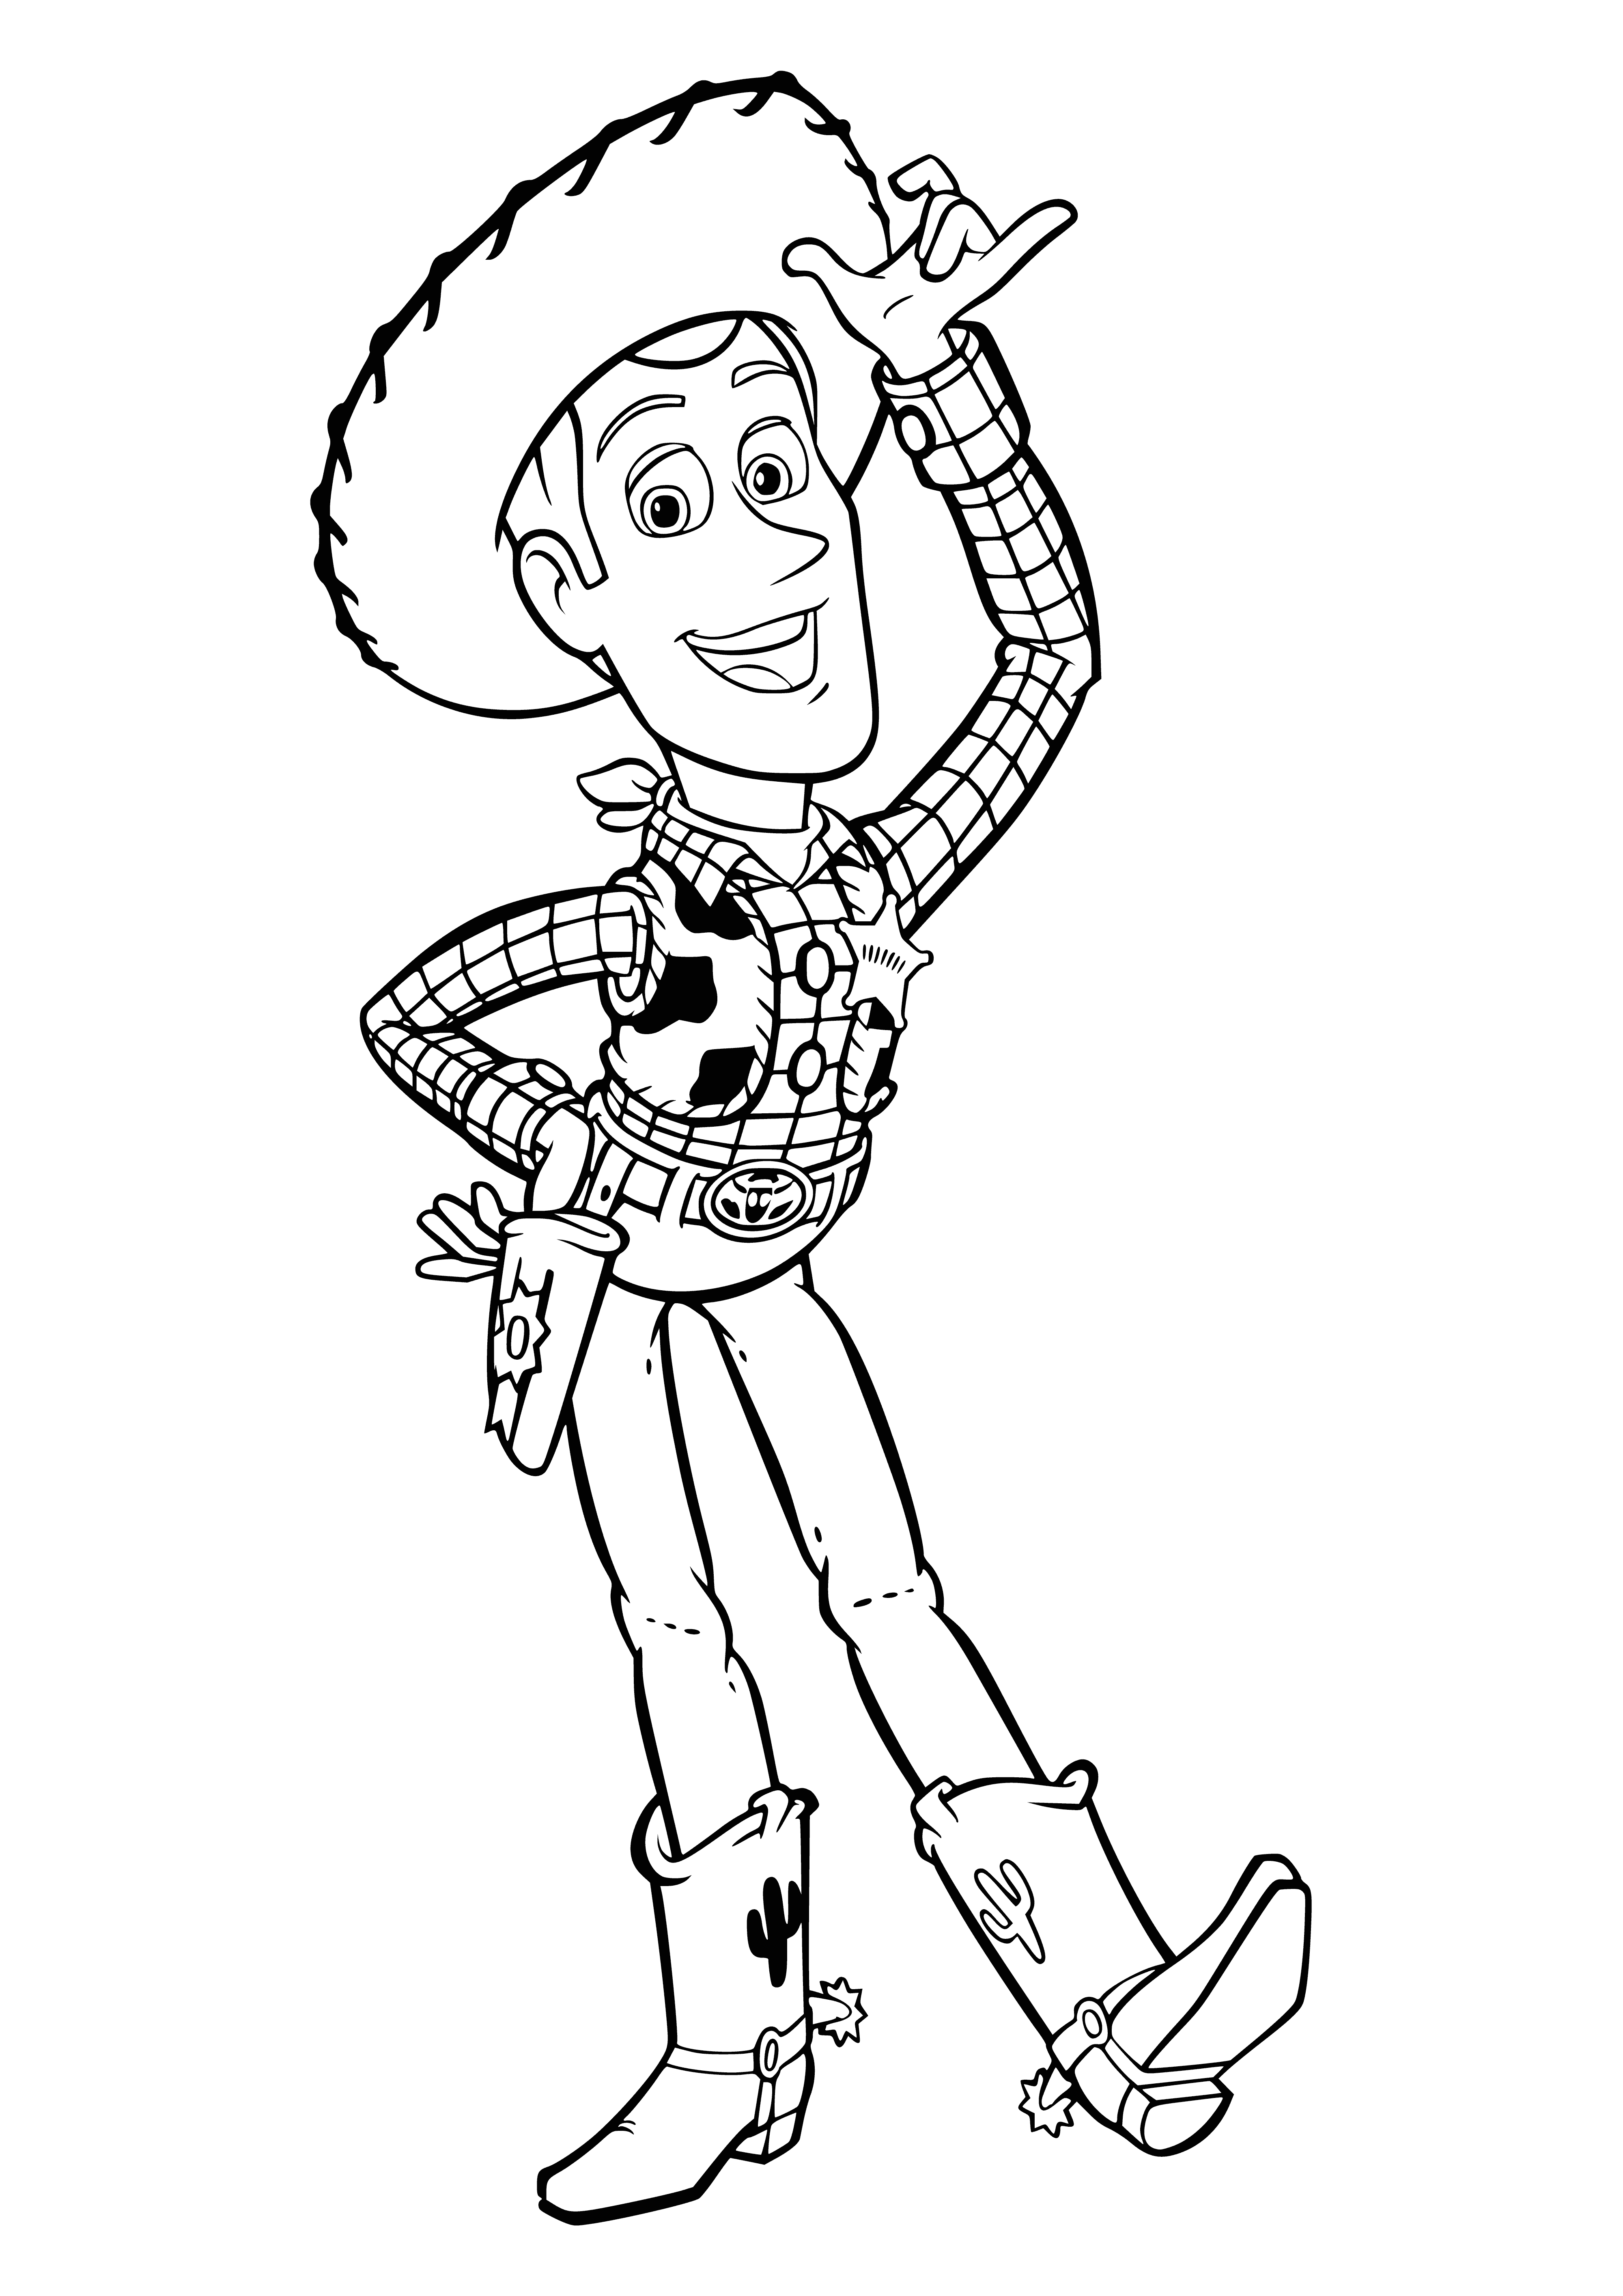 coloring page: Woody the plastic sheriff figurine has movable arms & legs w/ brown, tan, & yellow paint job, white collar, & silver star badge.